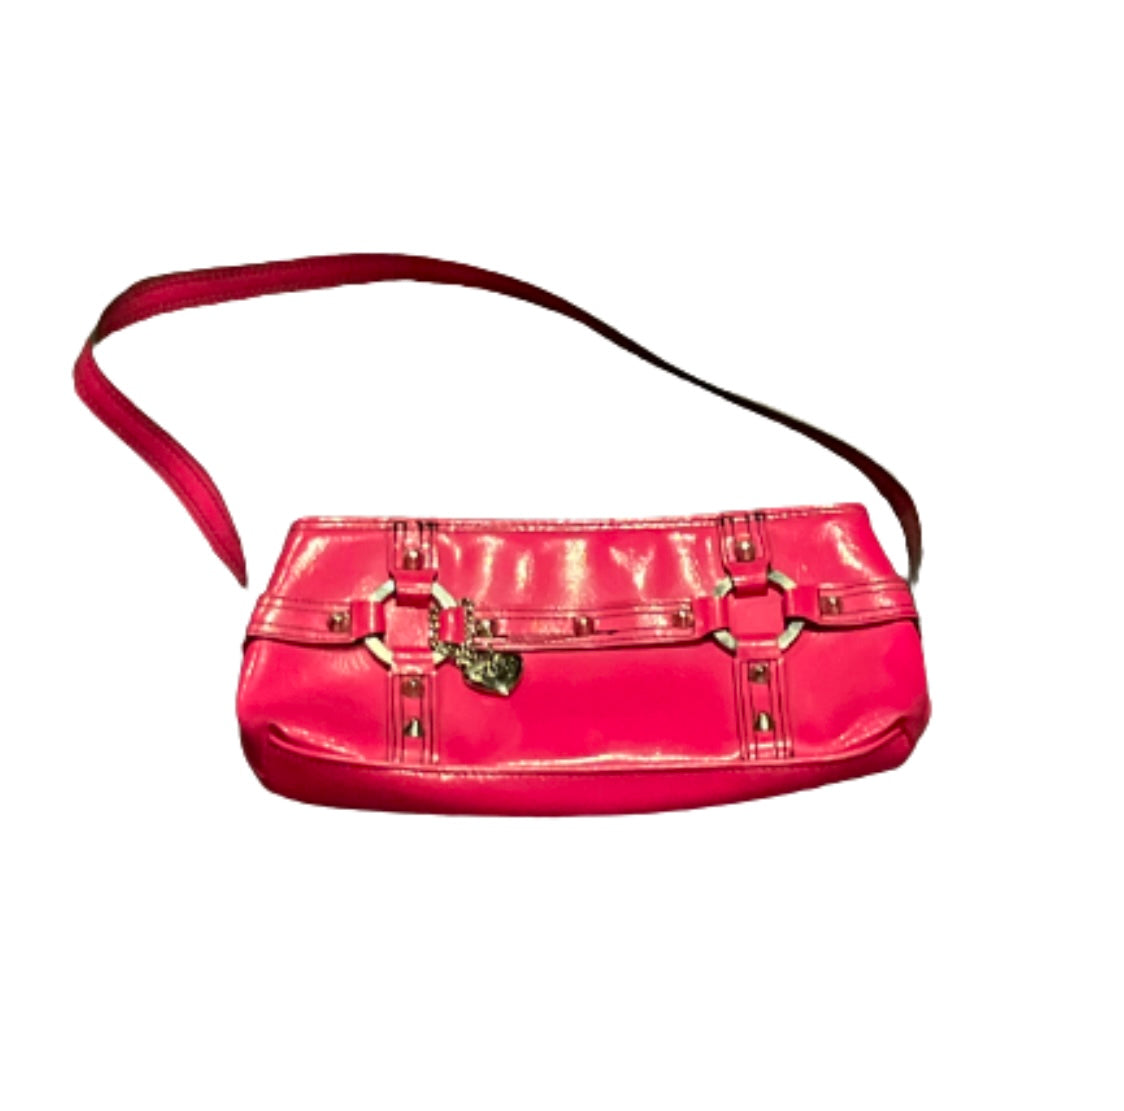 NEW GIRL: Jessica Day's Pink Purse with Bra and Panties Inside